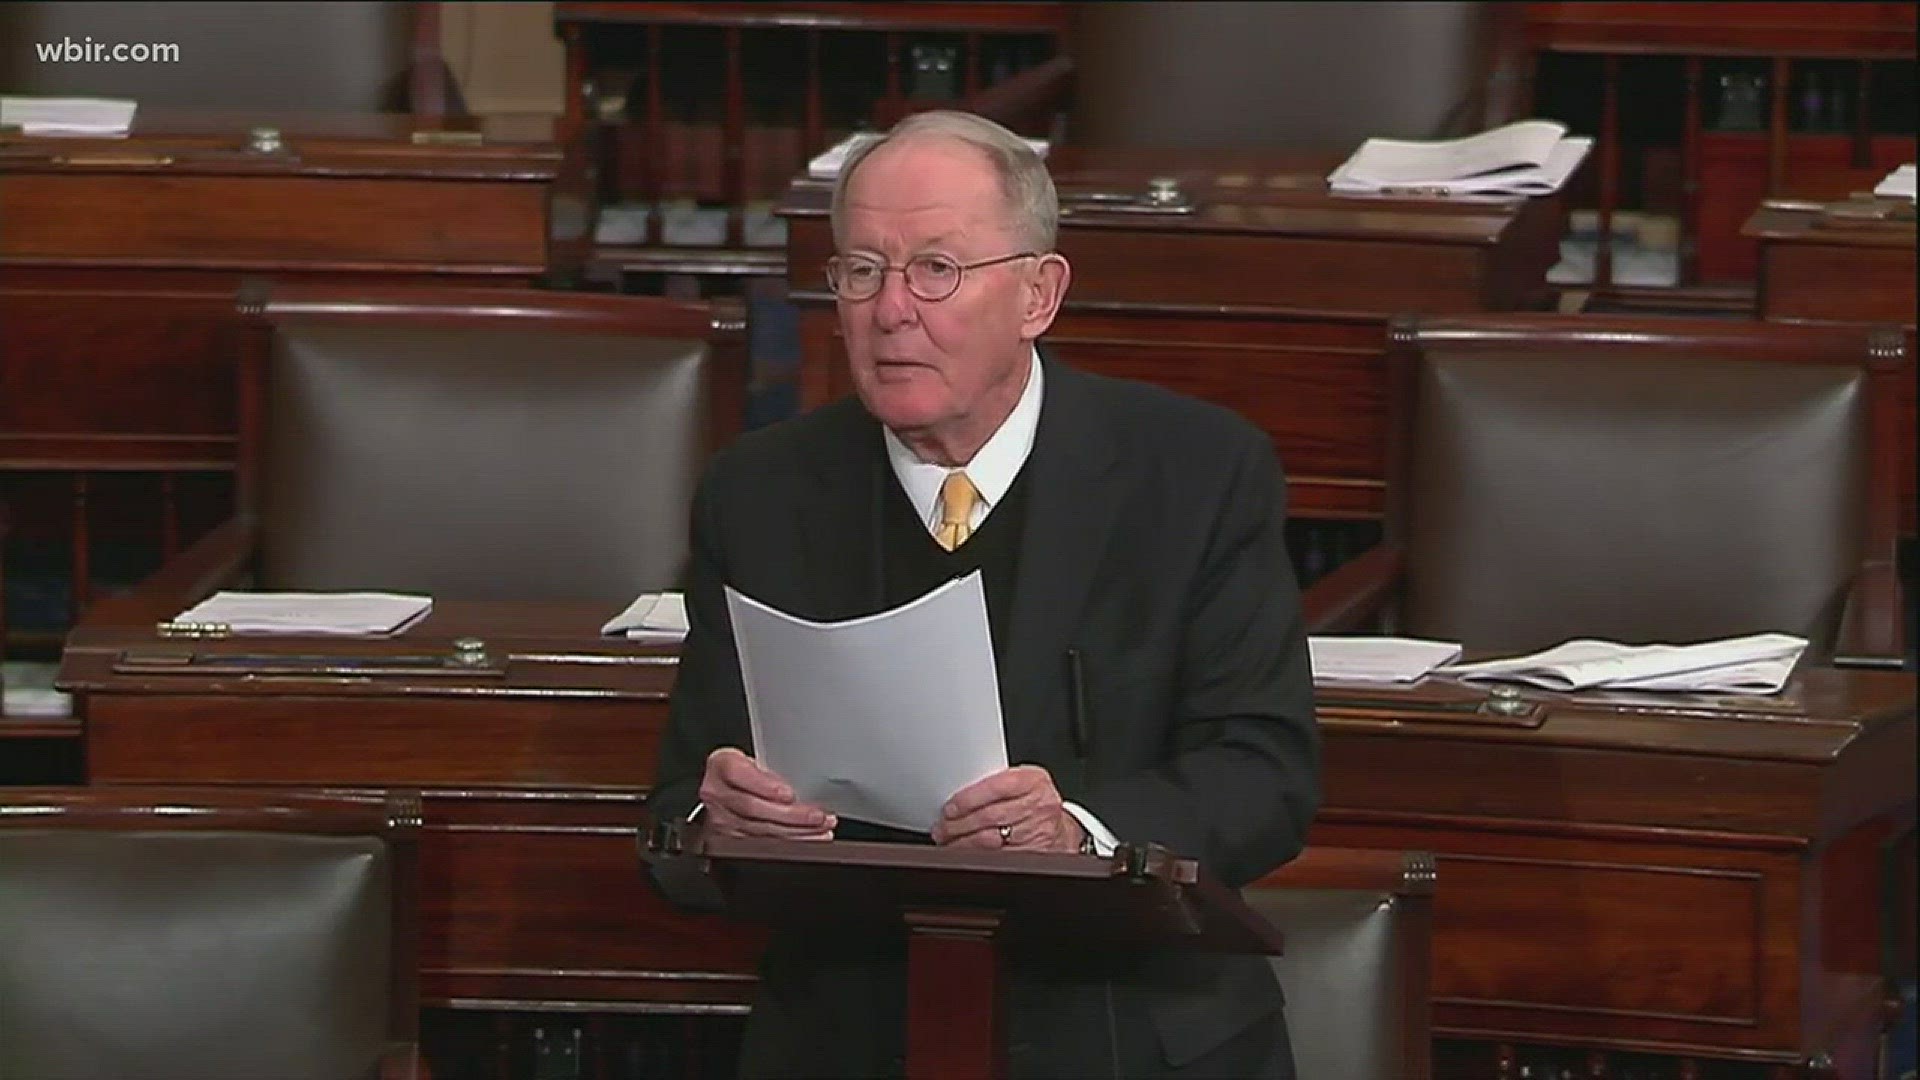 March 6, 2018: Tennessee Sen. Lamar Alexander plans to introduce a bill aimed at improving school safety and mental health services.